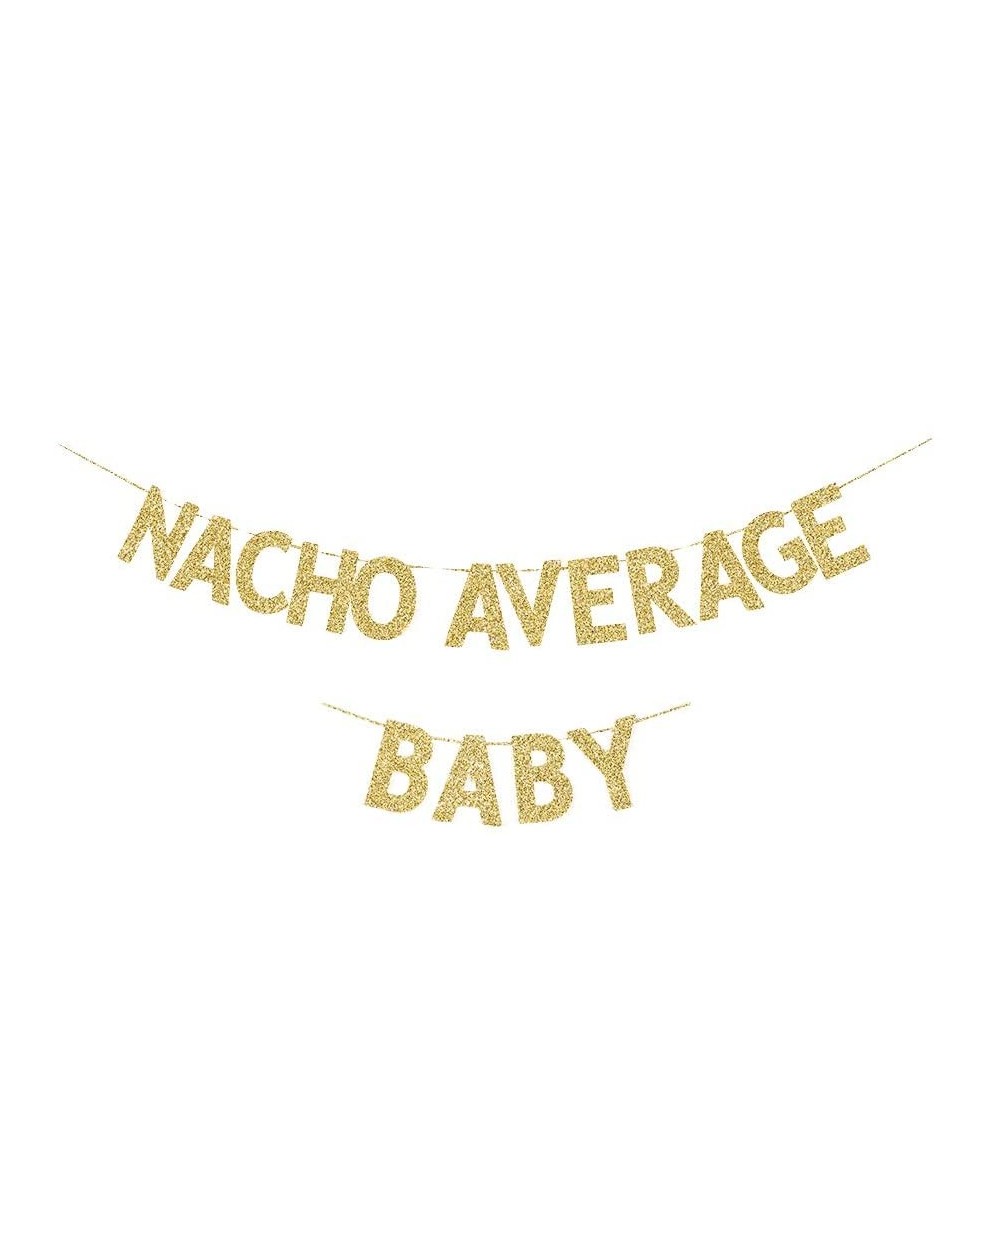 Banners & Garlands Nacho Average Baby Banner- Mexician Theme Baby Shower Party Decors Gold Gliter Paper Sign - C5193XAYN68 $1...